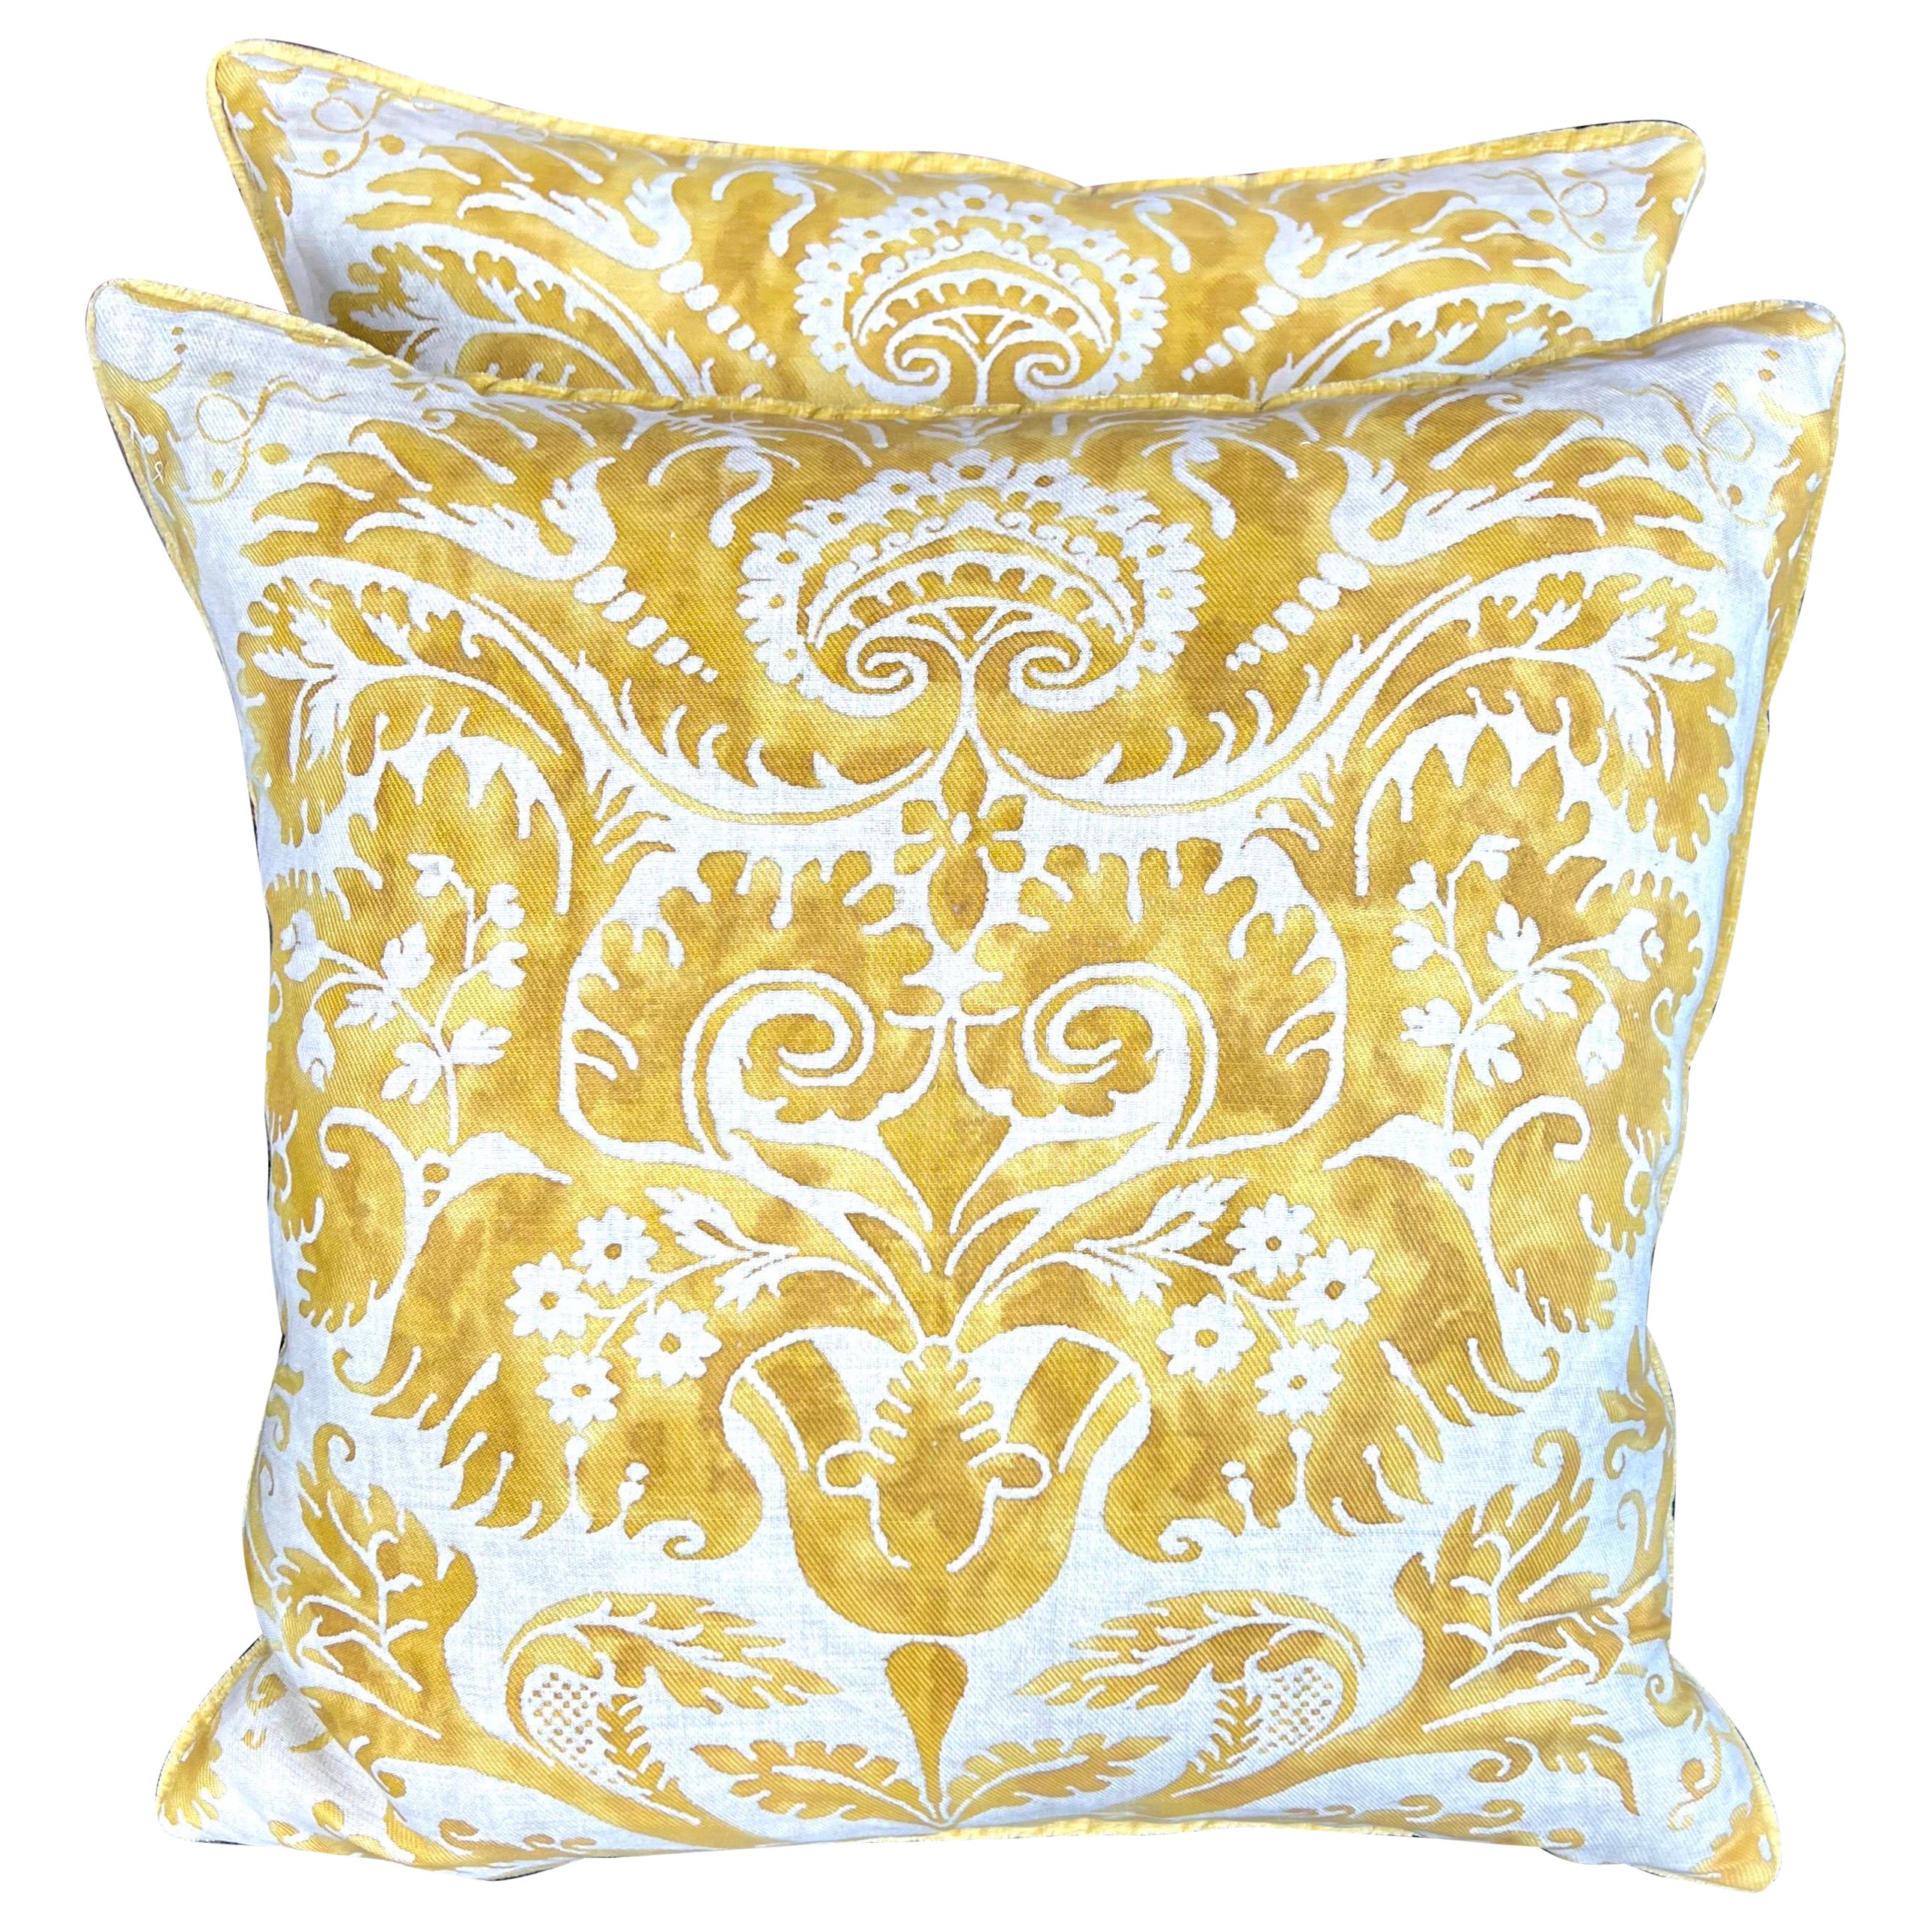 Pair of Yellow & White De Medici Patterned Fortuny Pillows For Sale